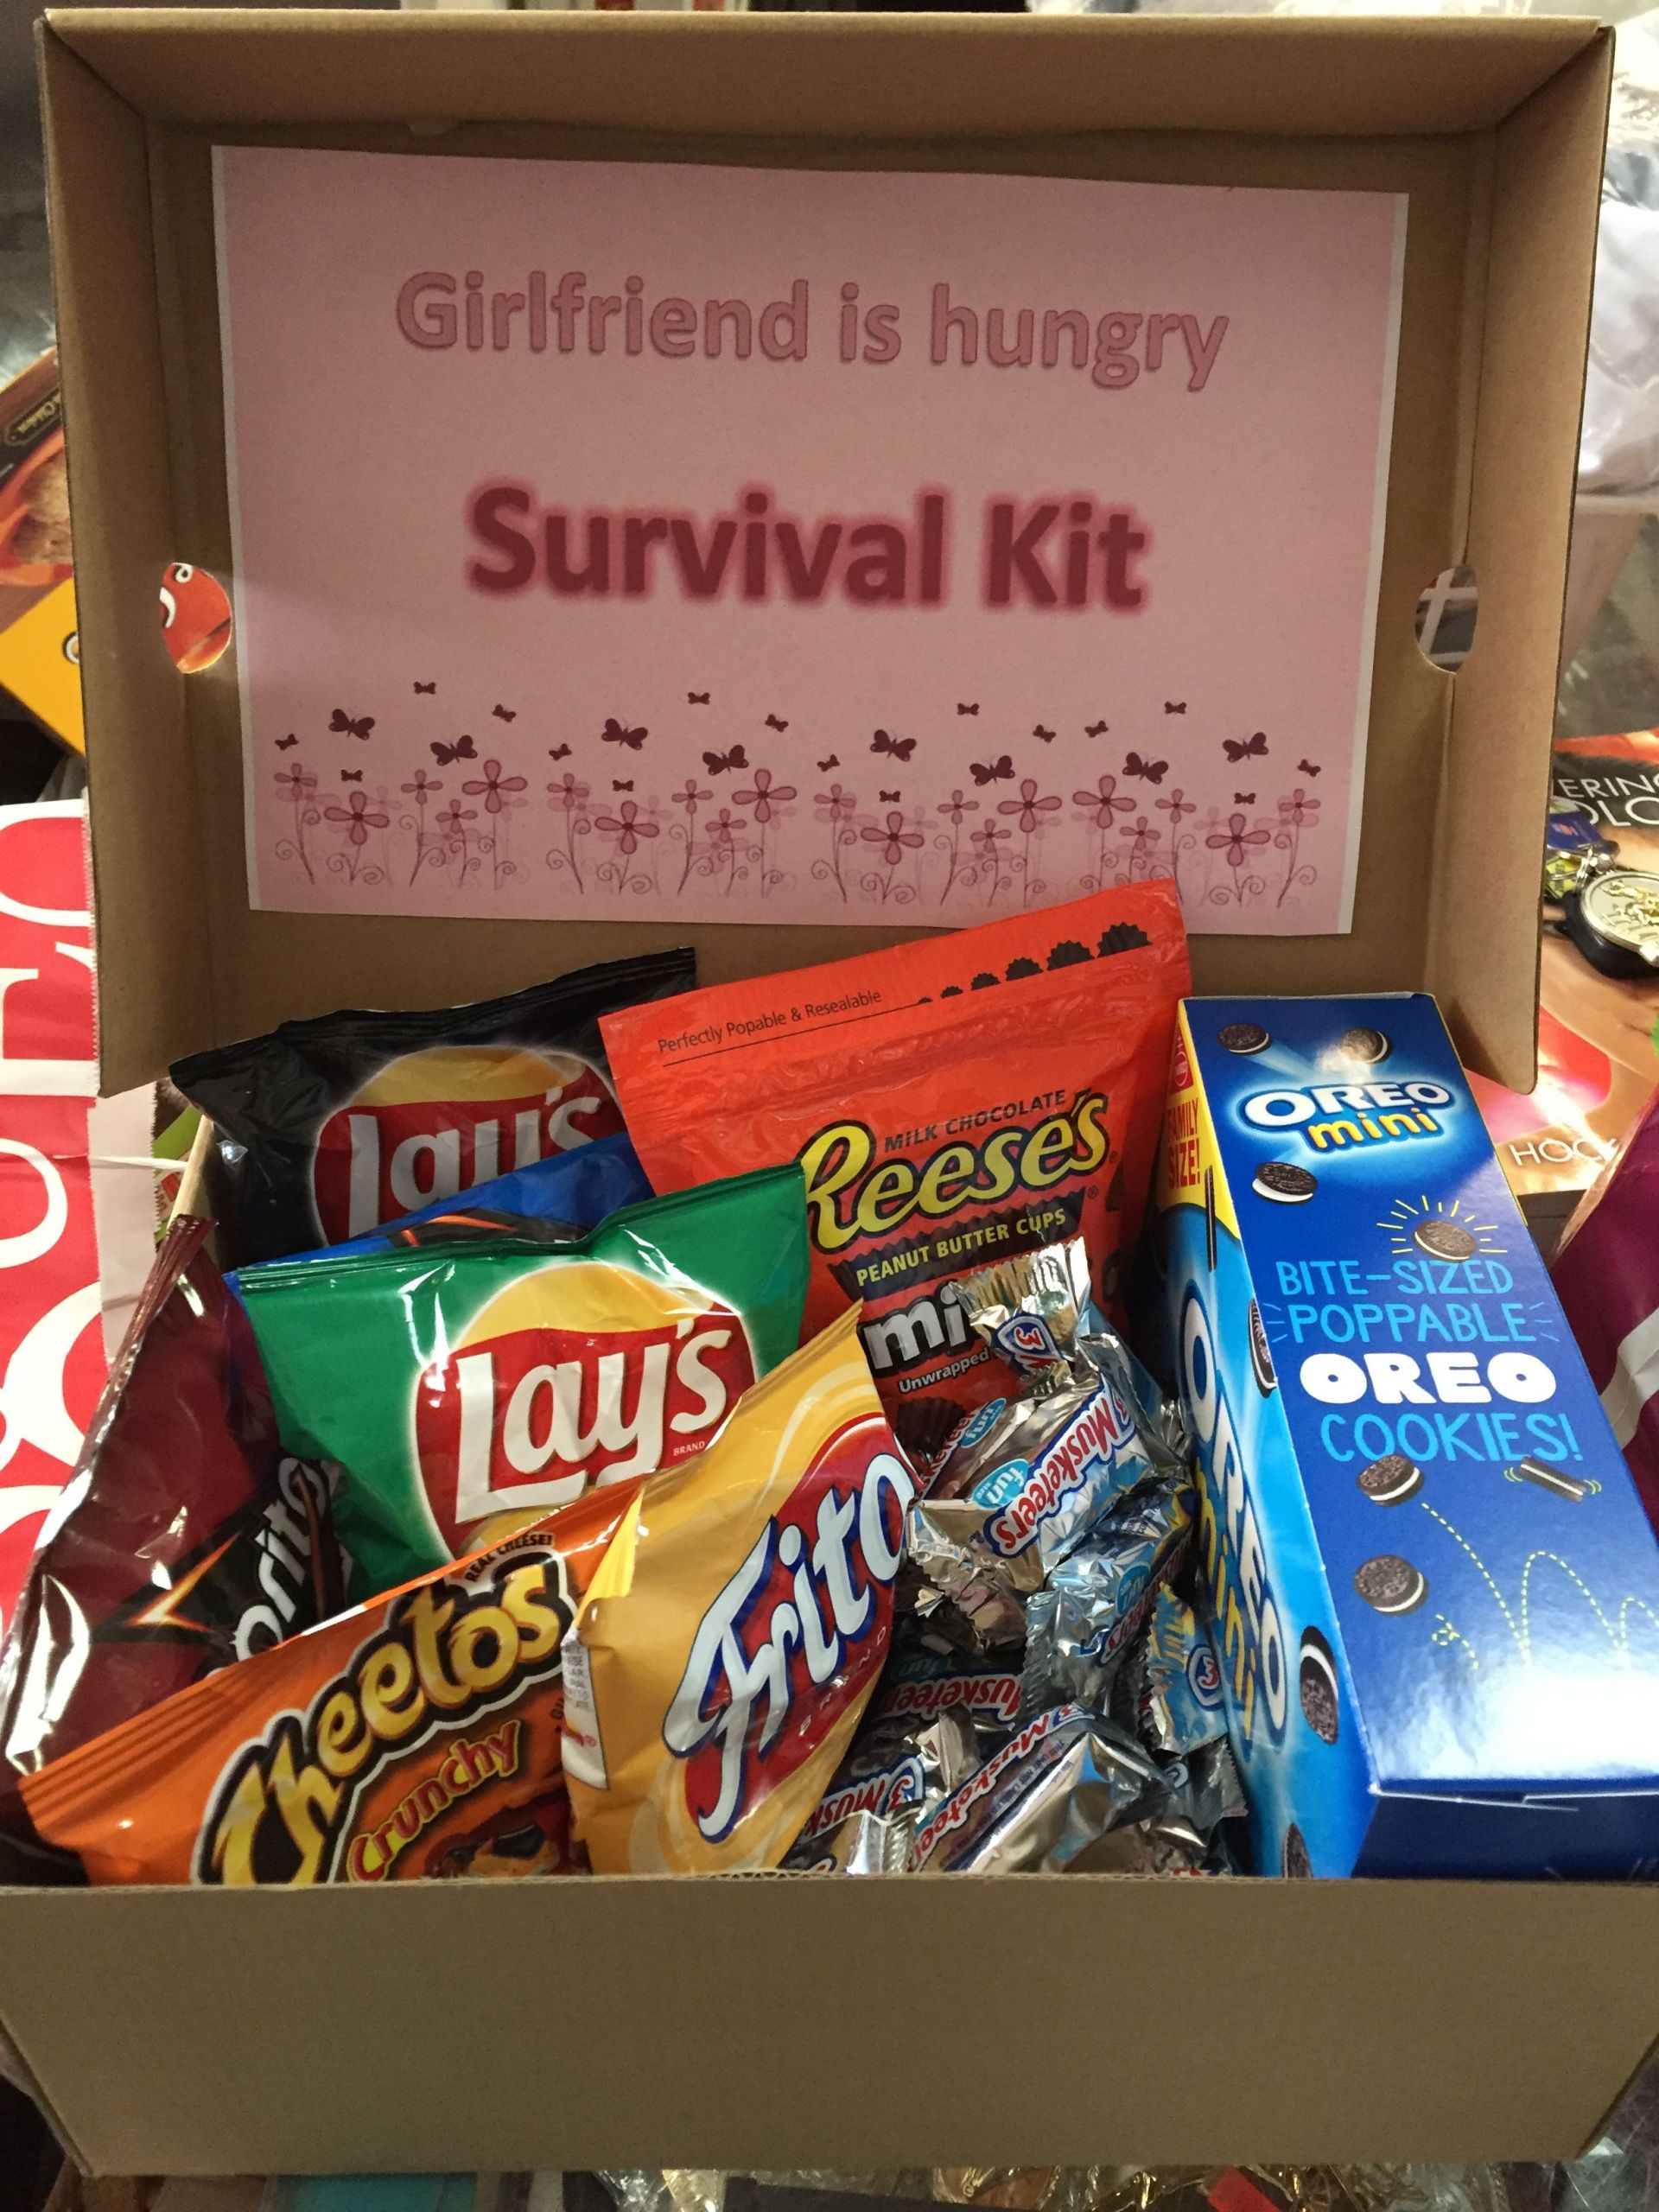 Sentimental Gift Ideas For Girlfriend
 Pin on Things for Girlfriend